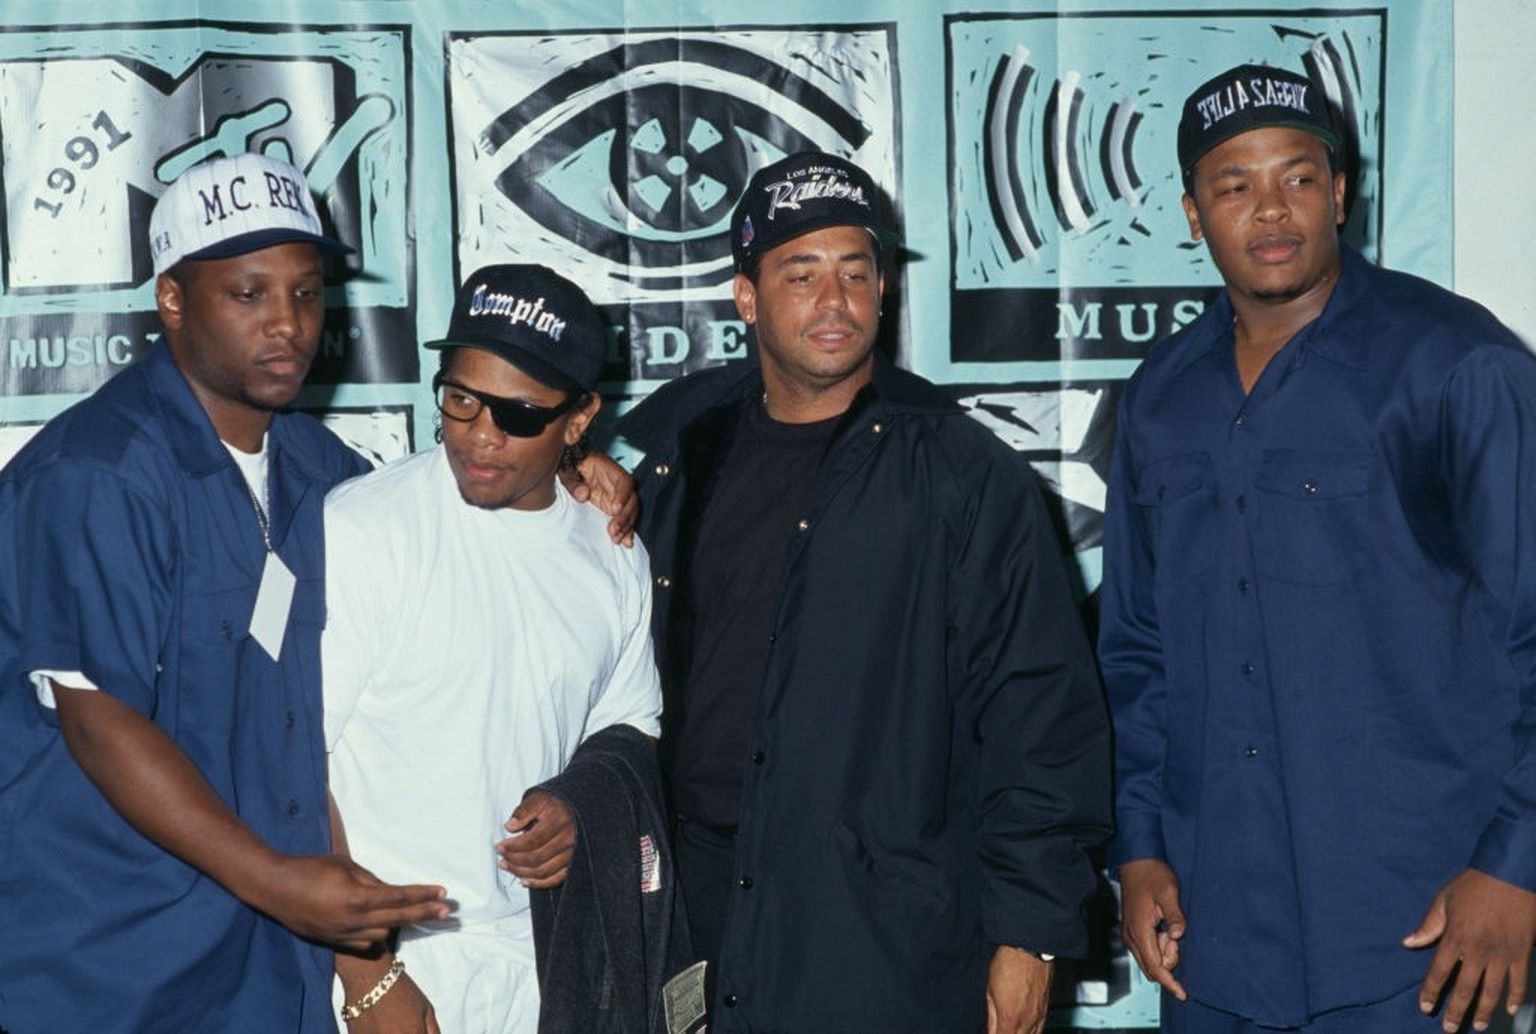 American hip hop group NWA (American rapper MC Ren, American rapper Eazy-E (1964-1995), American rapper DJ Yella, and American rapper Dr Dre) attend 8th Annual MTV Video Music Awards, held at the Univ ...